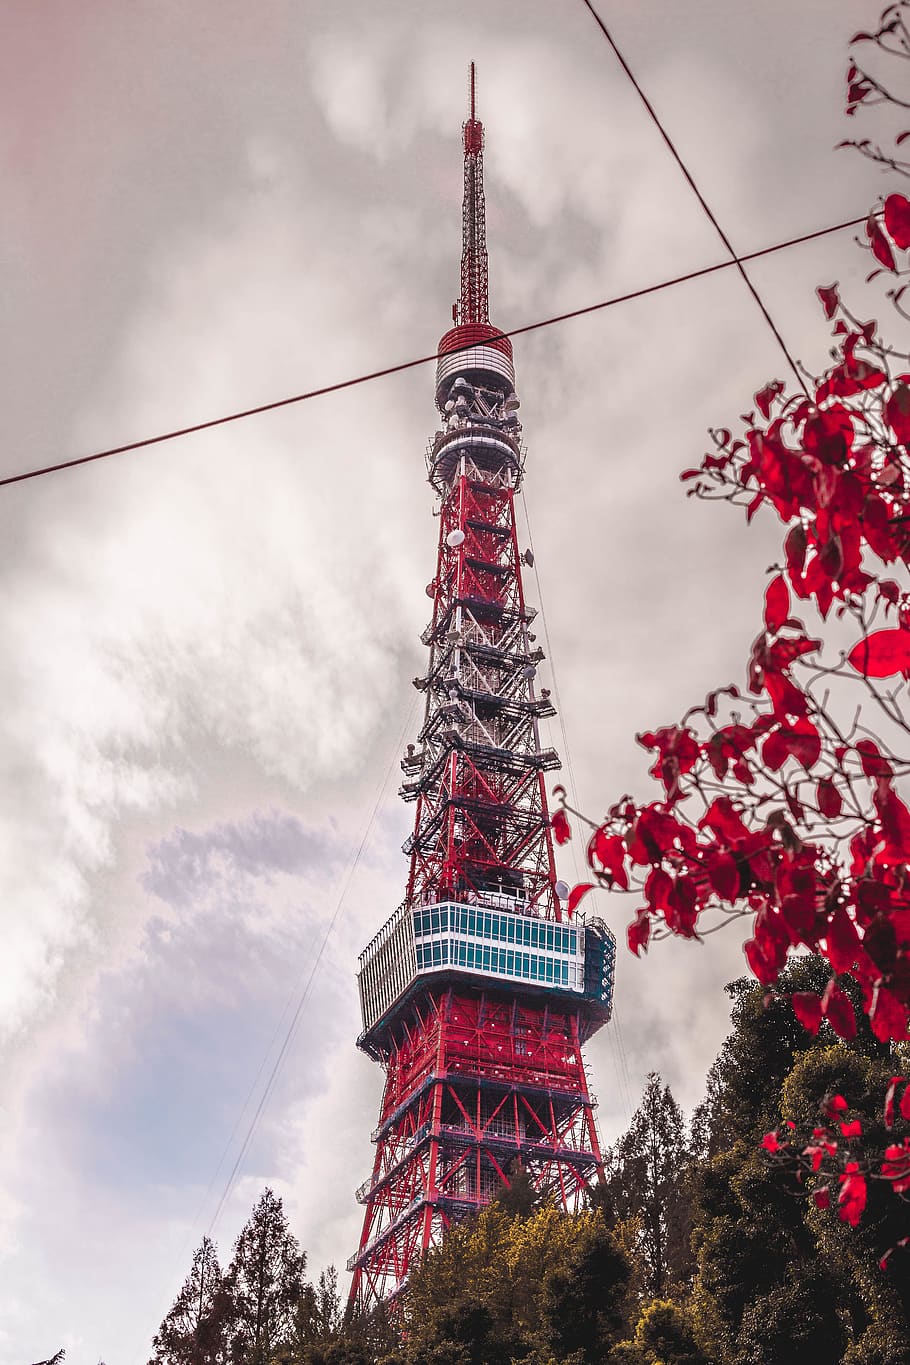 tokyo tower, red, japan, trees, cloudy, architecture, tall - high